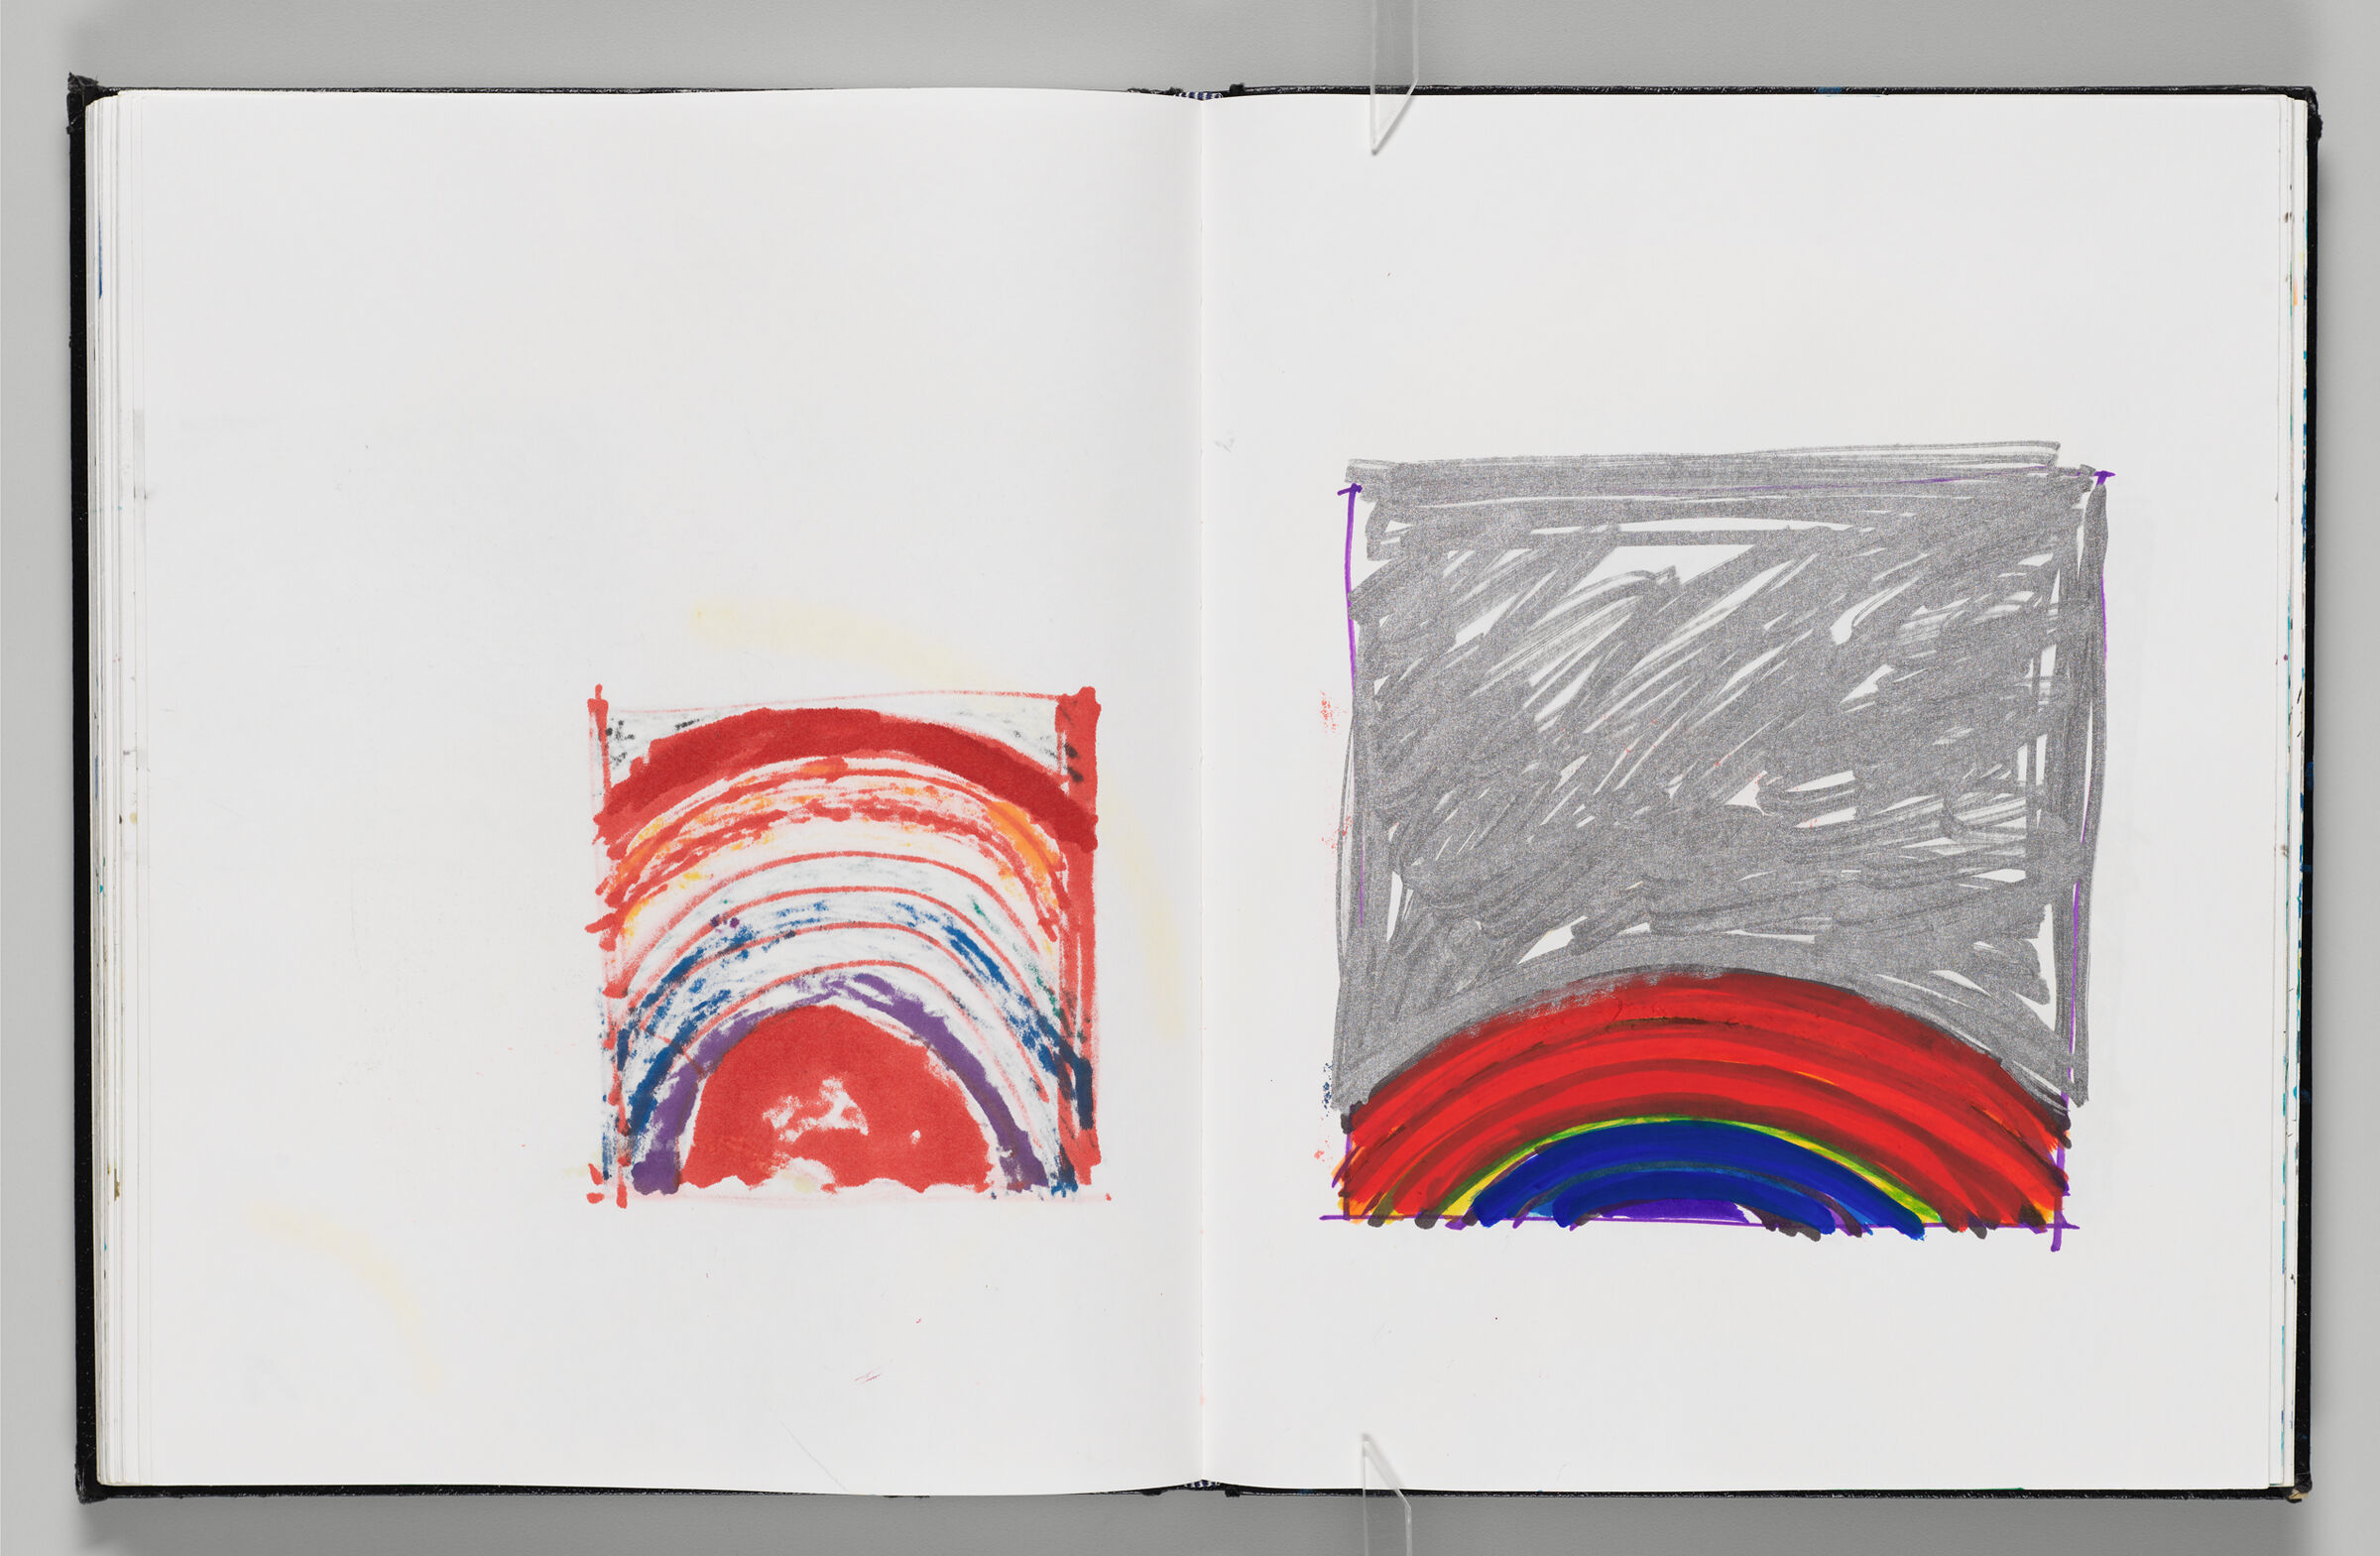 Untitled (Bleed-Through Of Previous Page, Left Page); Untitled (Rainbow Design For Rosenthal, Right Page)